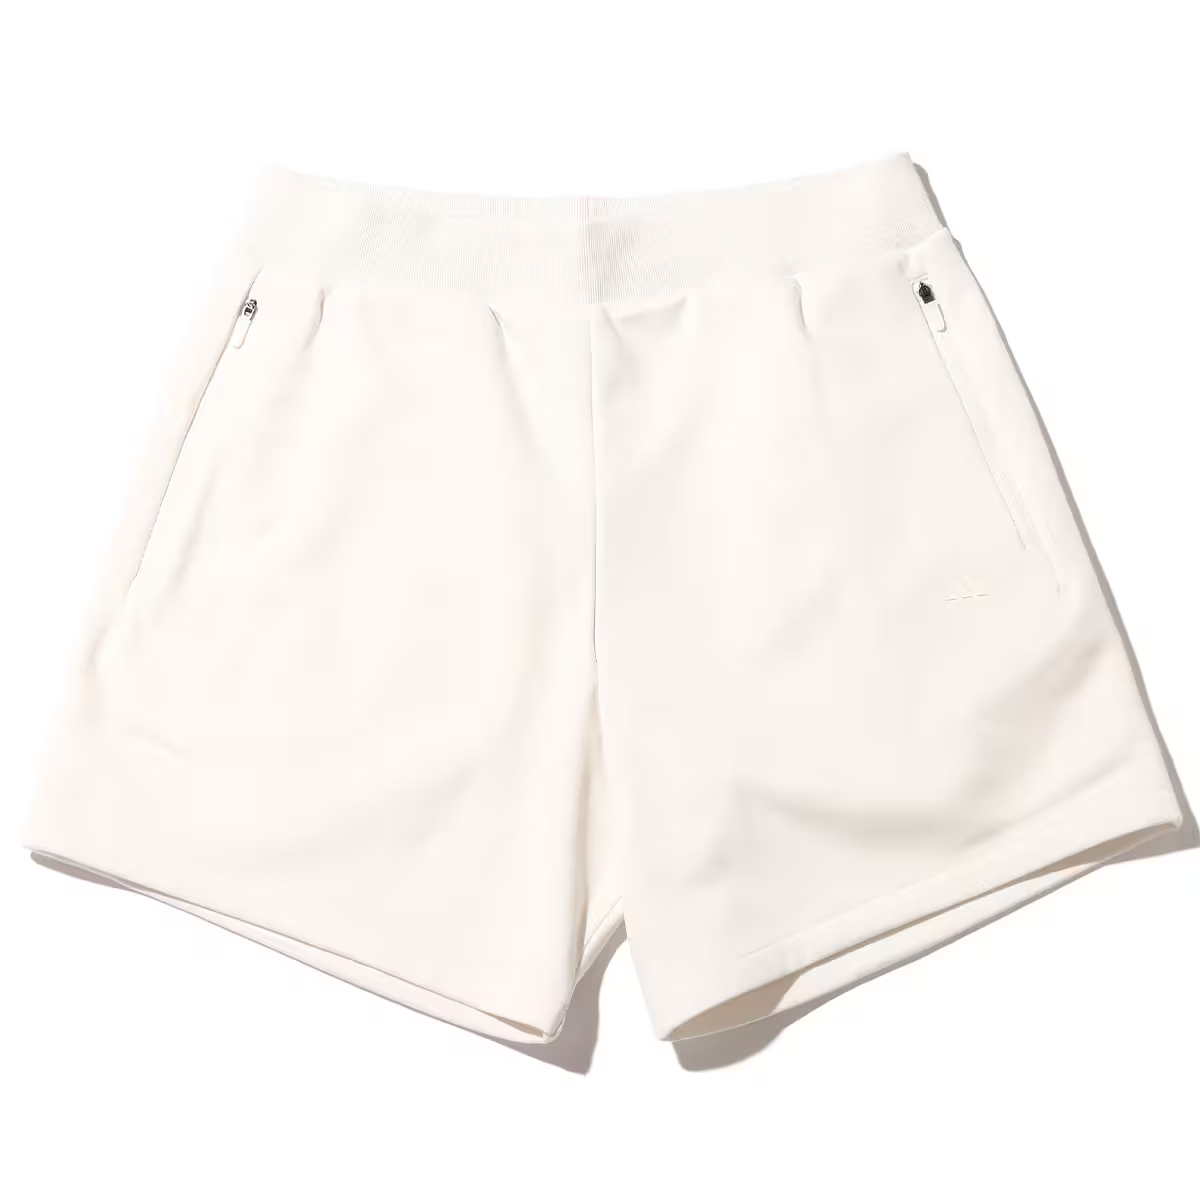 adidas Sports Club shorts in off white | ASOS